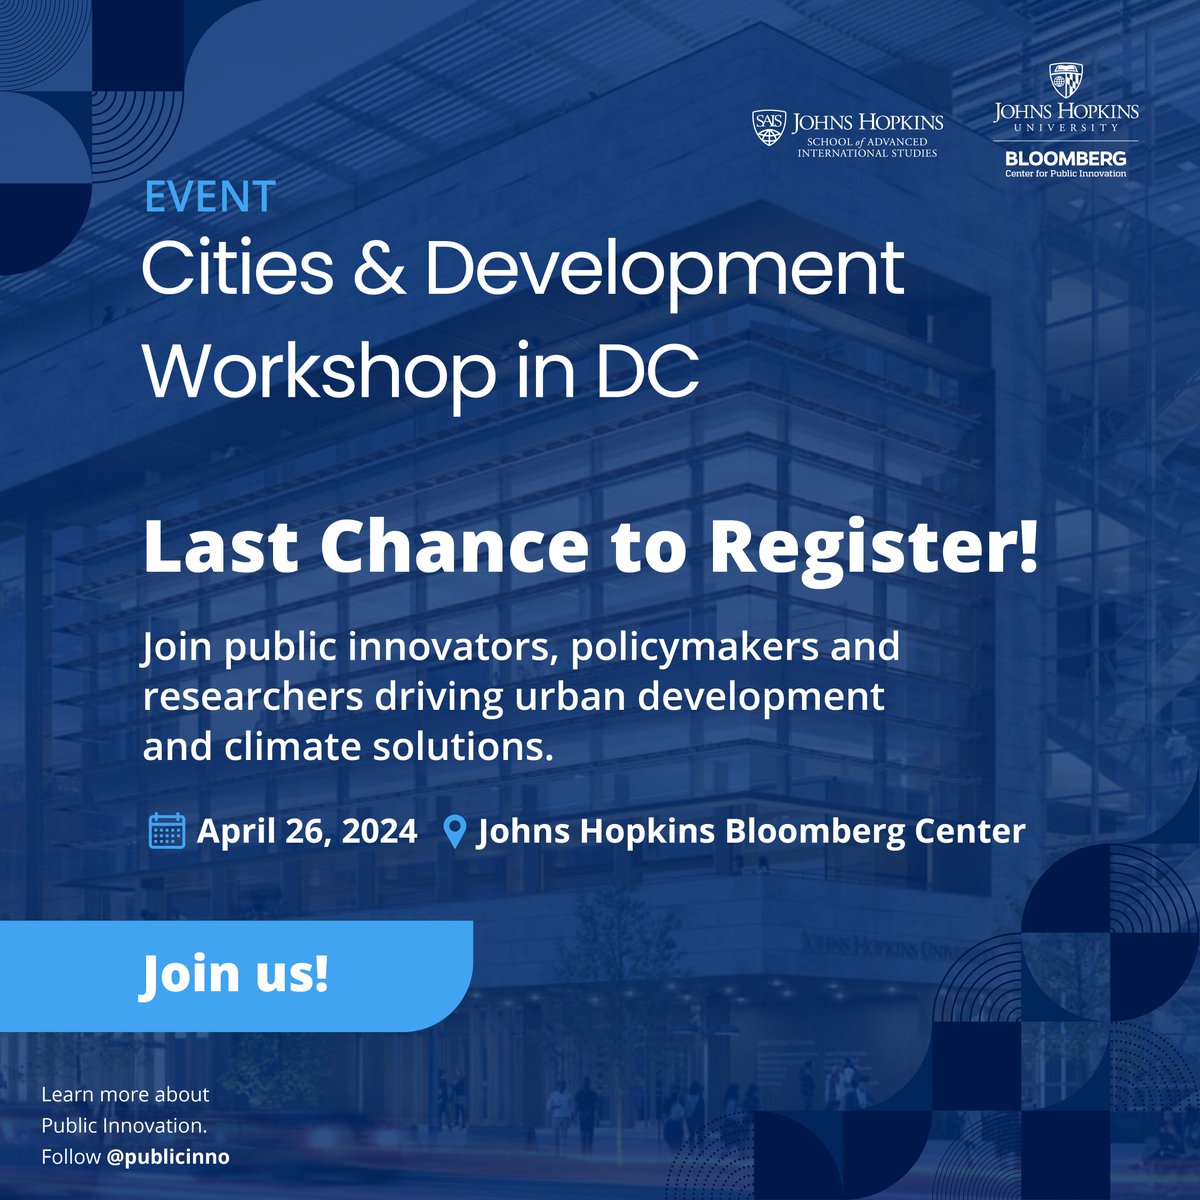 Register today for the #CitiesAndDevelopment Workshop in DC to join innovators, policymakers, & researchers at the intersection of #PublicInnovation & #UrbanTransformation. 🗓️ April 26 at @JHUBloombergCtr Join us 🔗 hubs.ly/Q02sJNch0